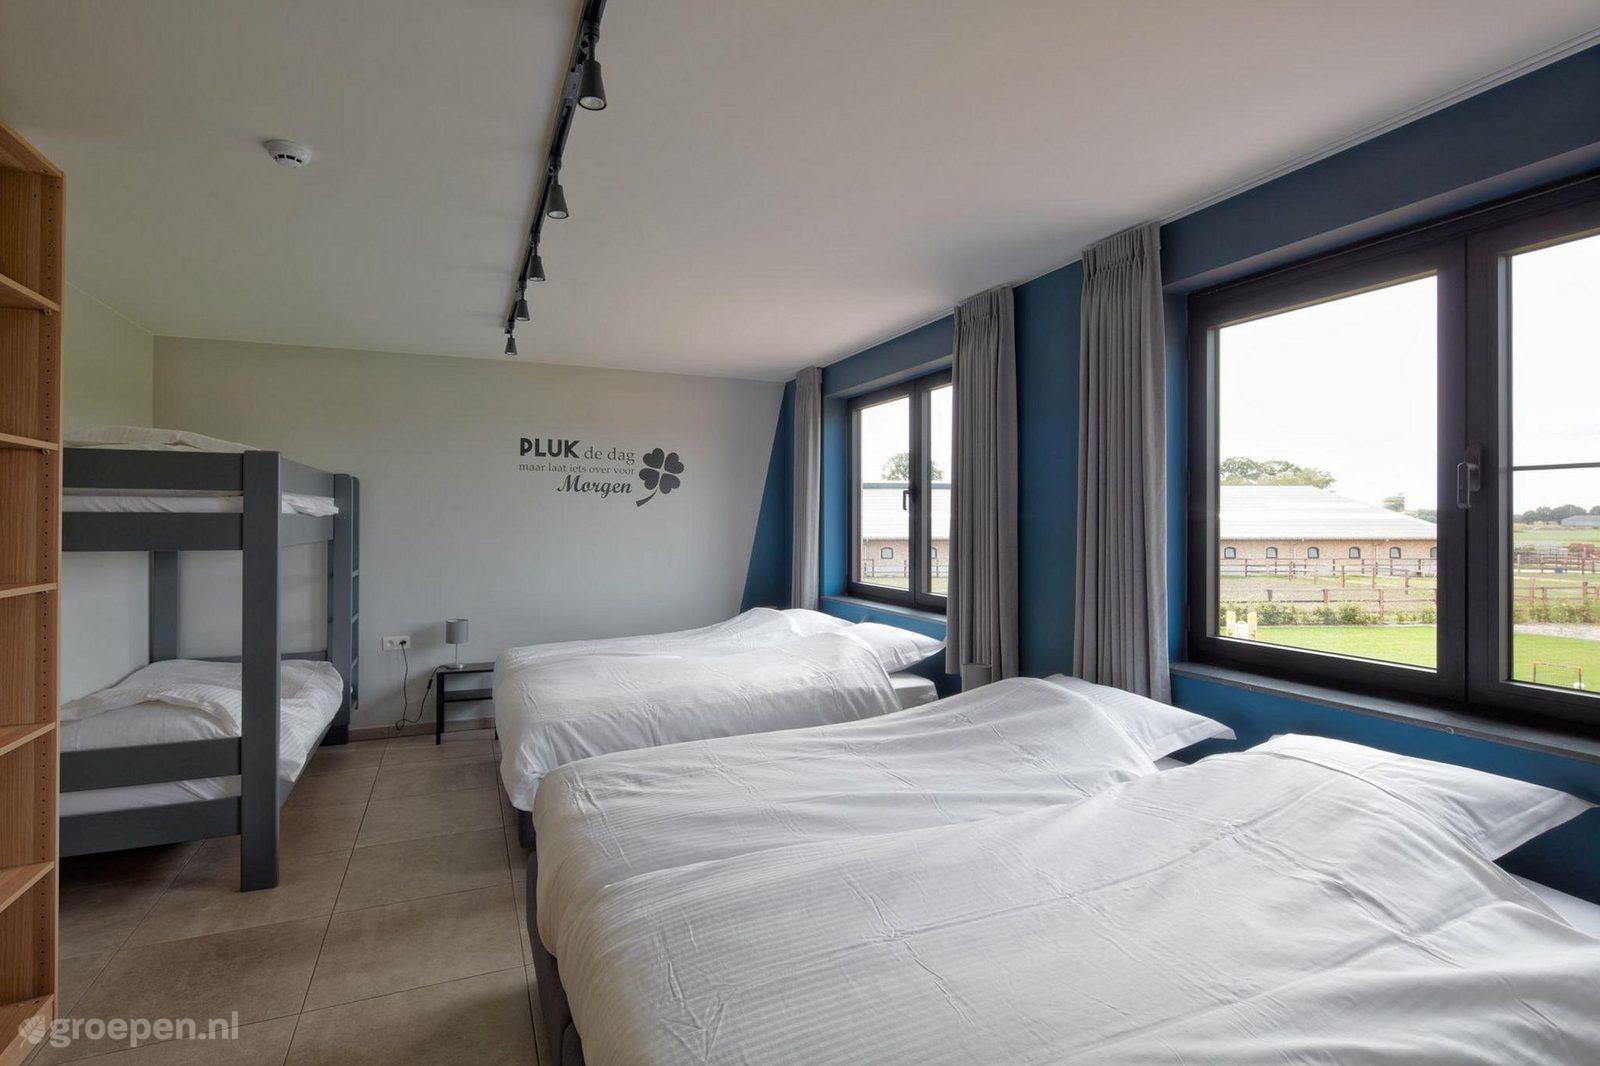 Group accommodation Antwerp